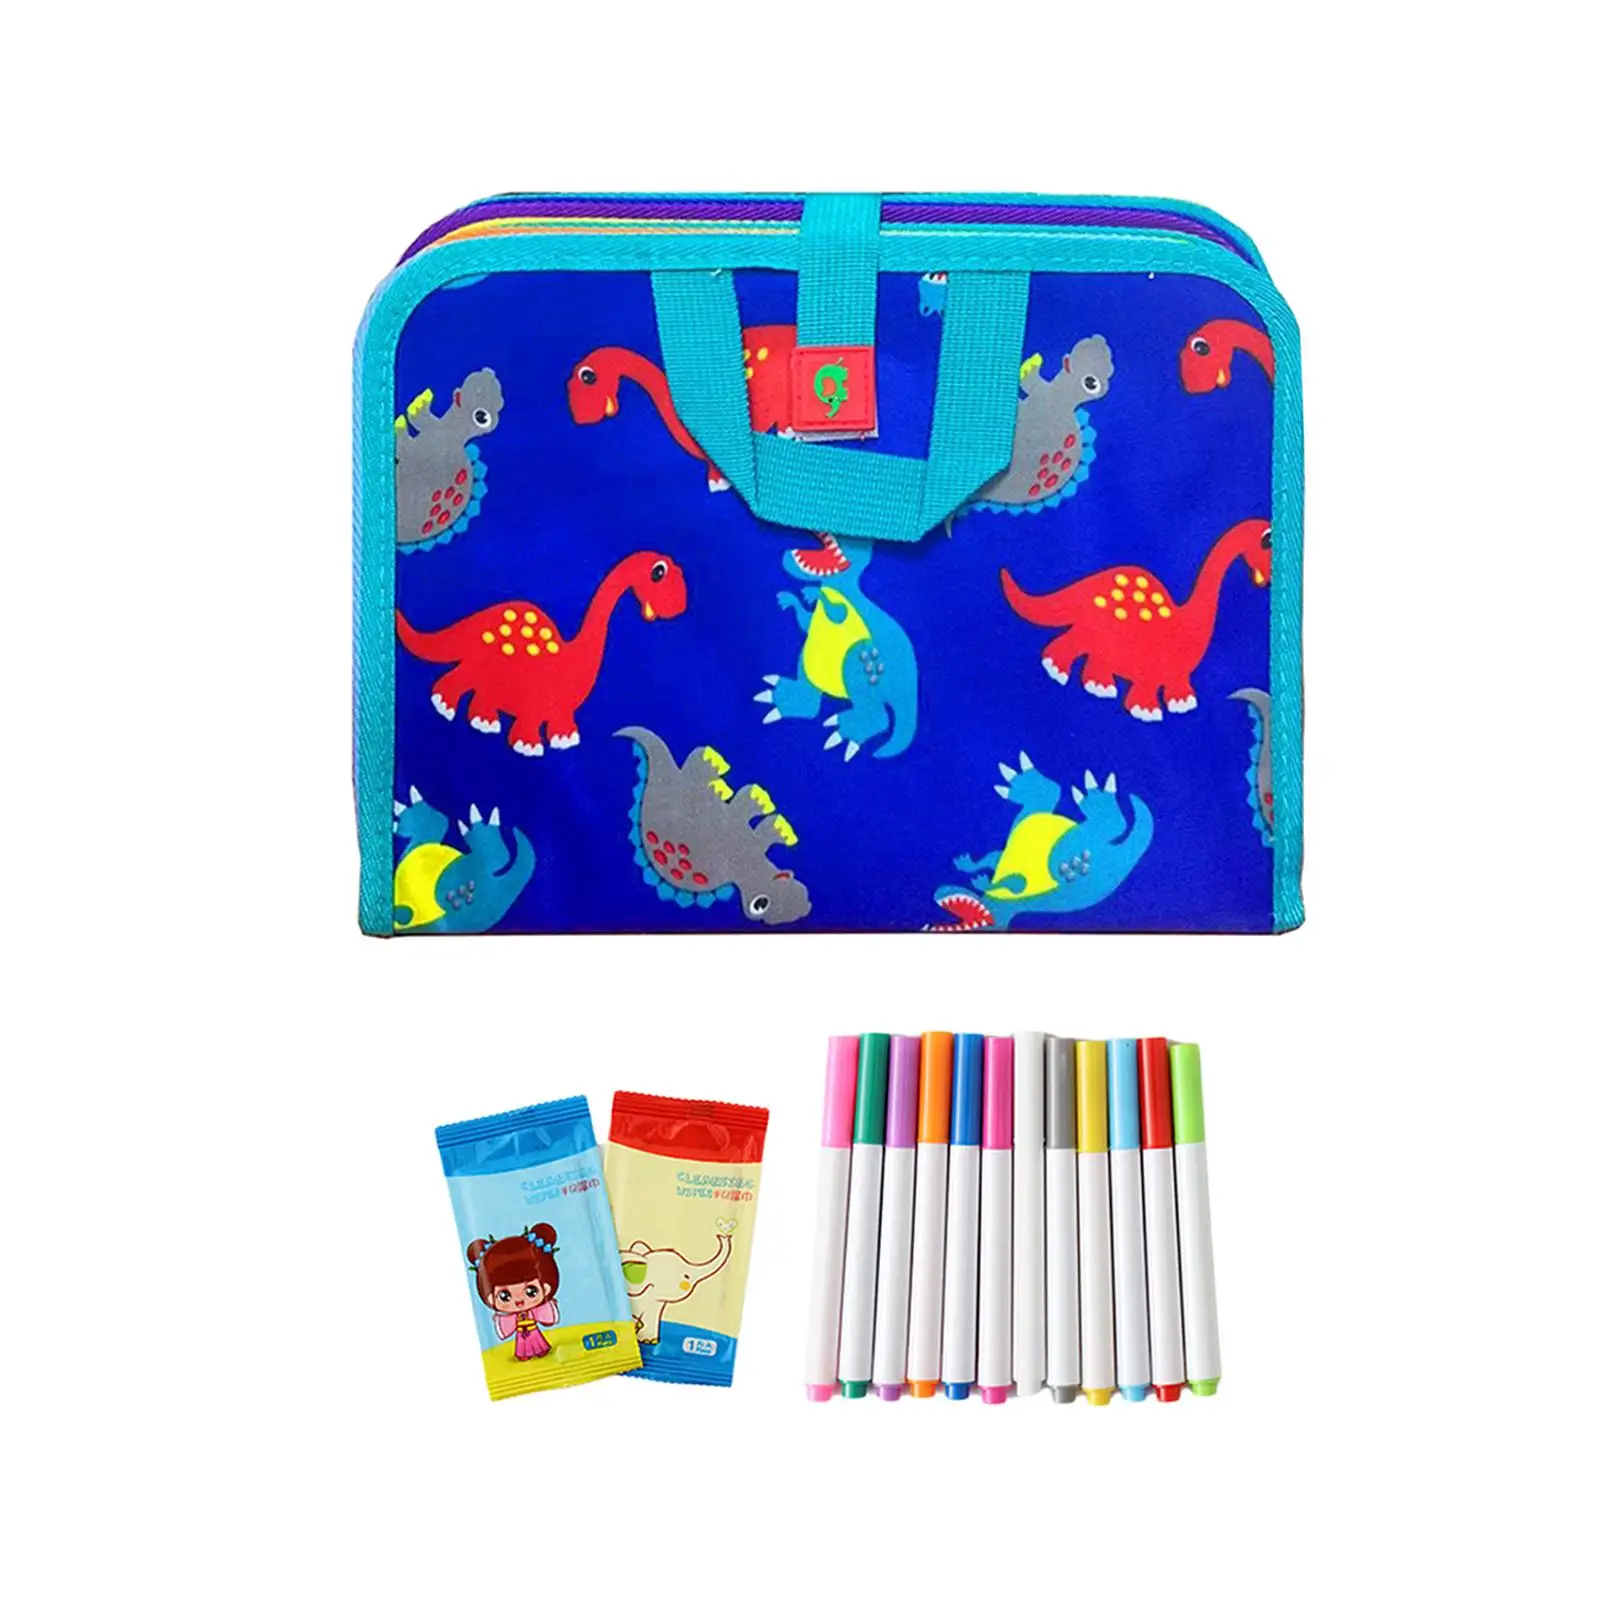 Erasable Book Doodle Set Boys Girls Ages 3+ Toddlers Drawing Pad Holiday Present Writing Painting Set with 12 Watercolor Pens